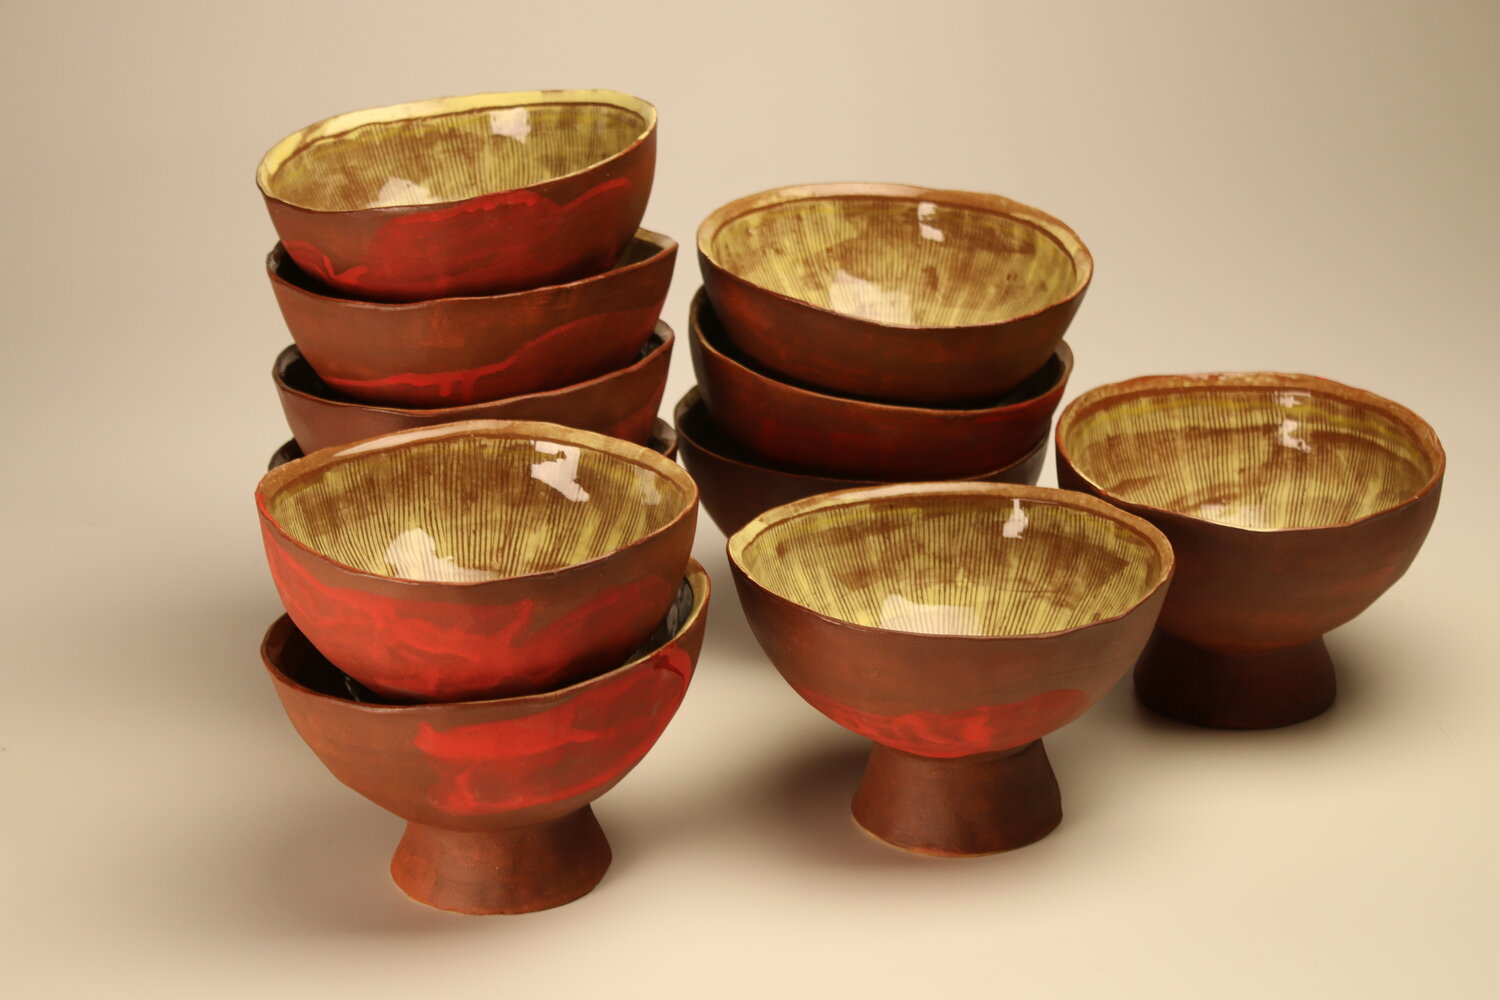 A batch of small ceramic bowls by Sara Hensel, image courtesy of the artist